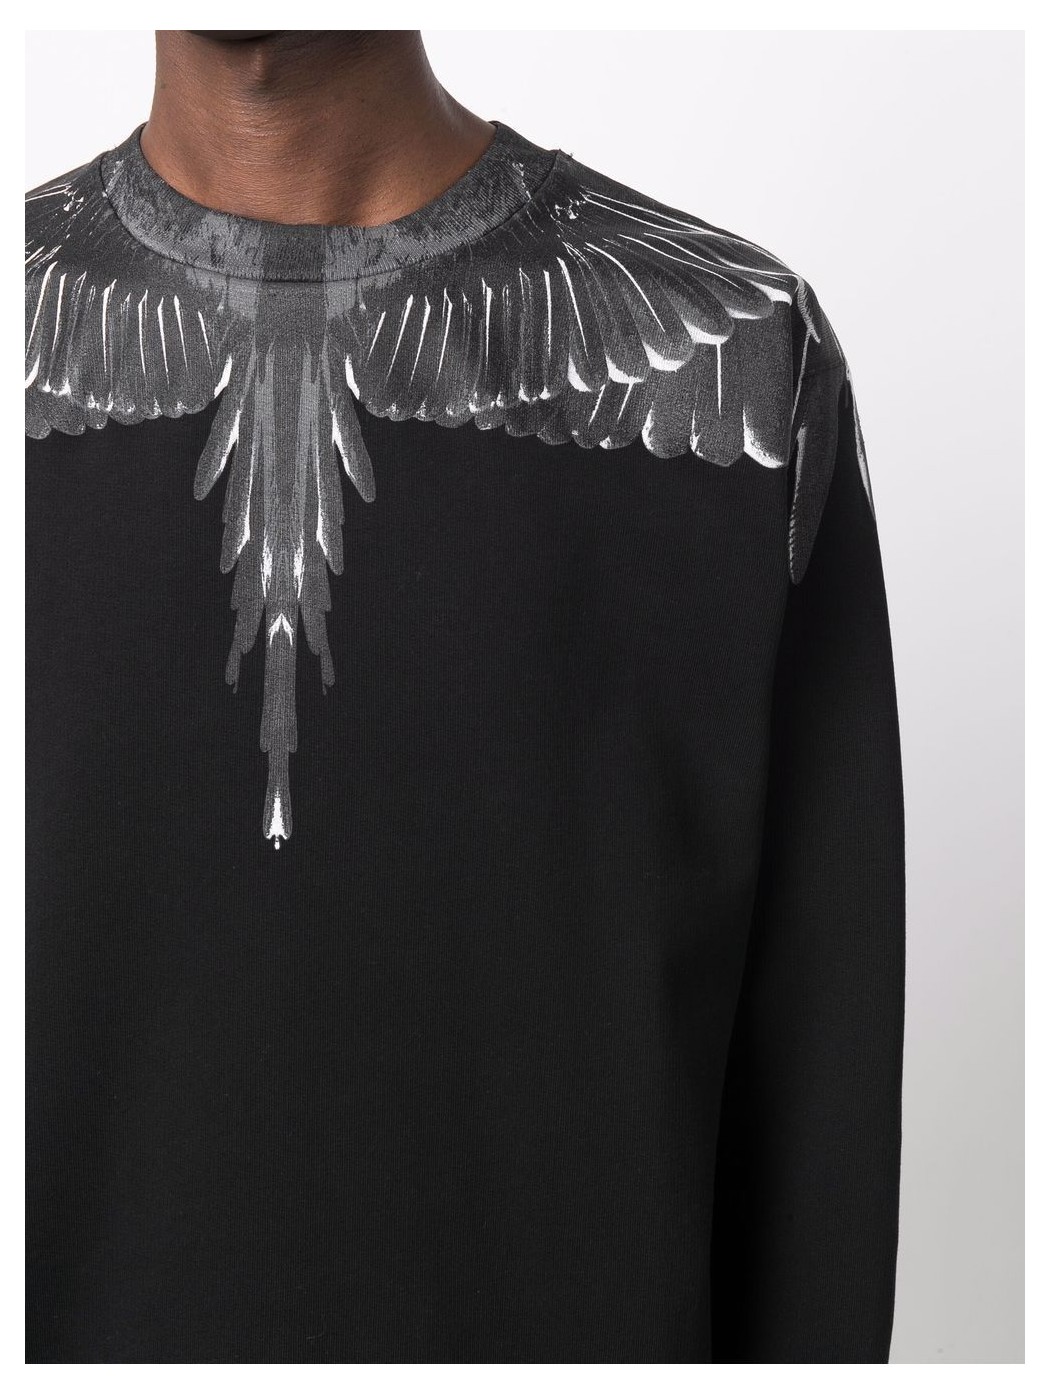 SWEATSHIRT WITH ROUND NECK, LONG SLEEVE WITH FLORAL PRINT.  MARCELO BURLON